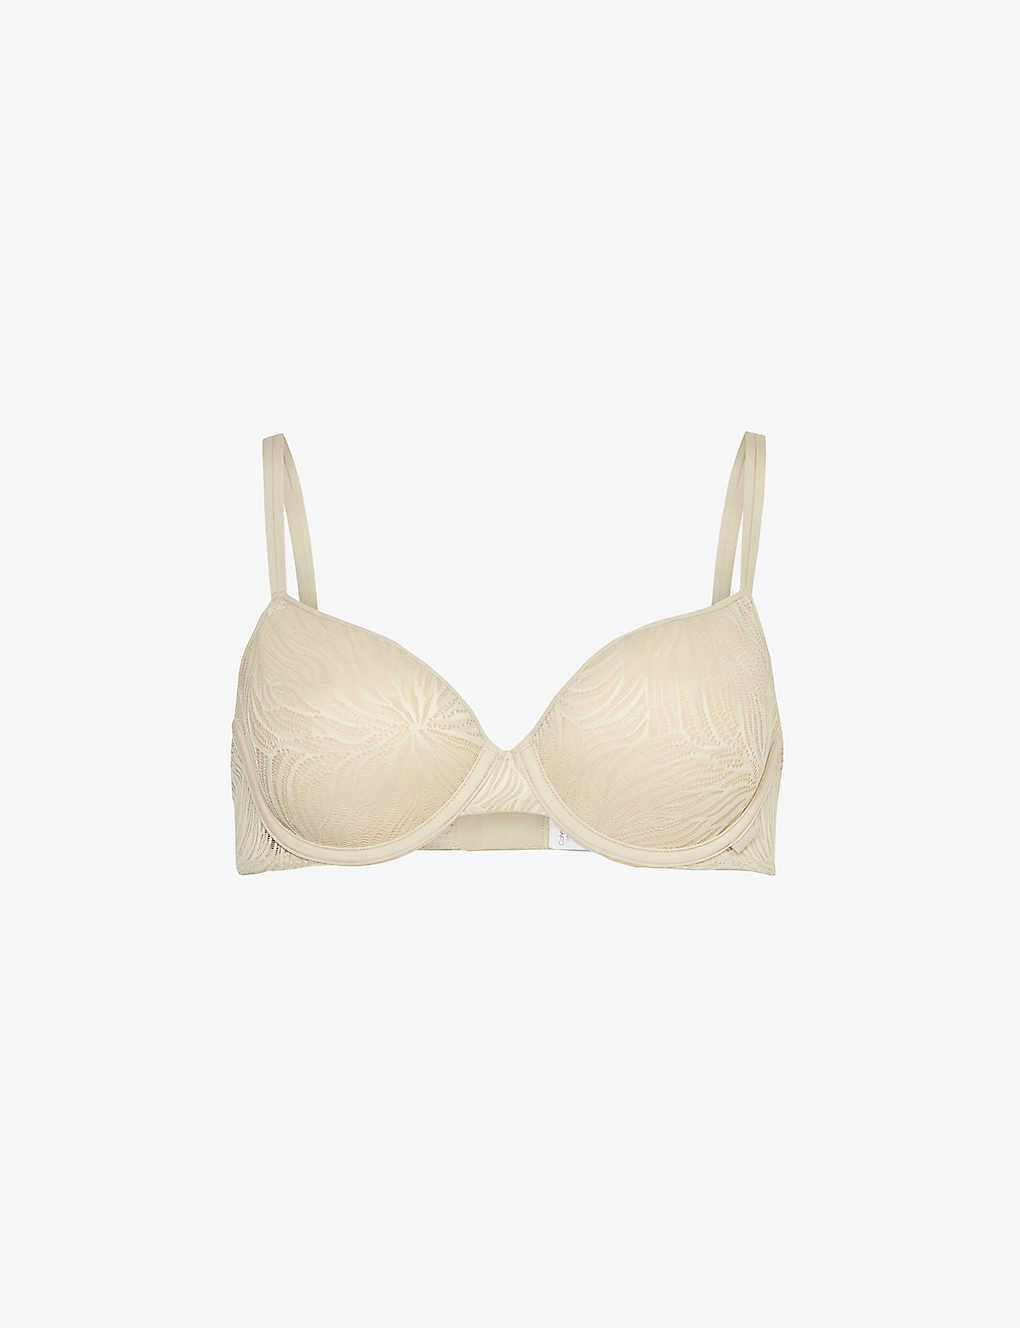 Shop Calvin Klein Women's Eucalyptus Sheer Marquisette Floral-embroidered Stretch-lace Bra